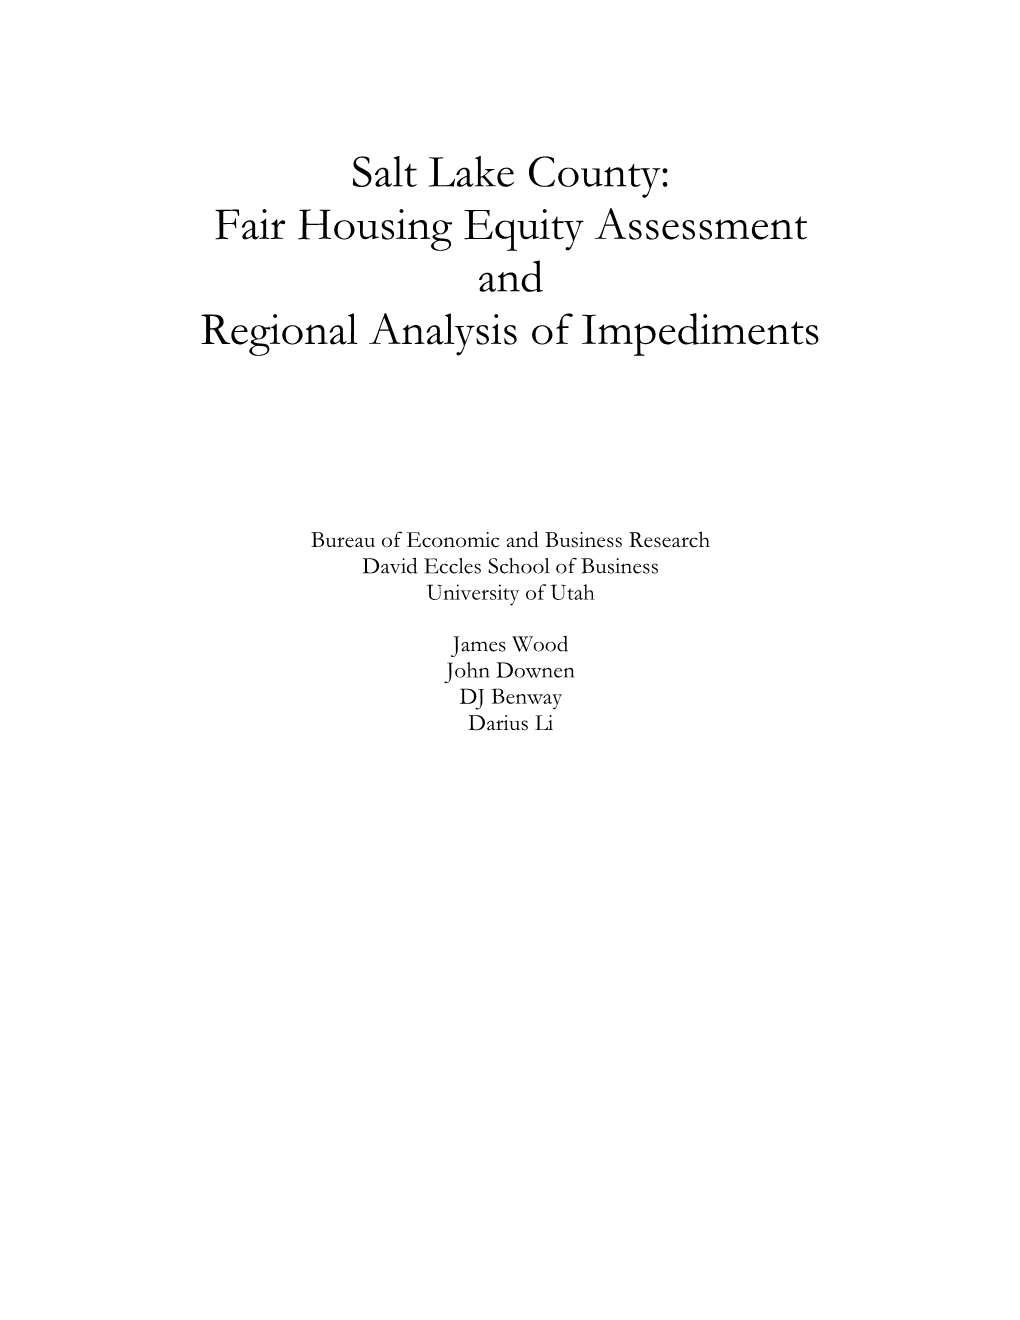 Salt Lake County: Fair Housing Equity Assessment and Regional Analysis of Impediments